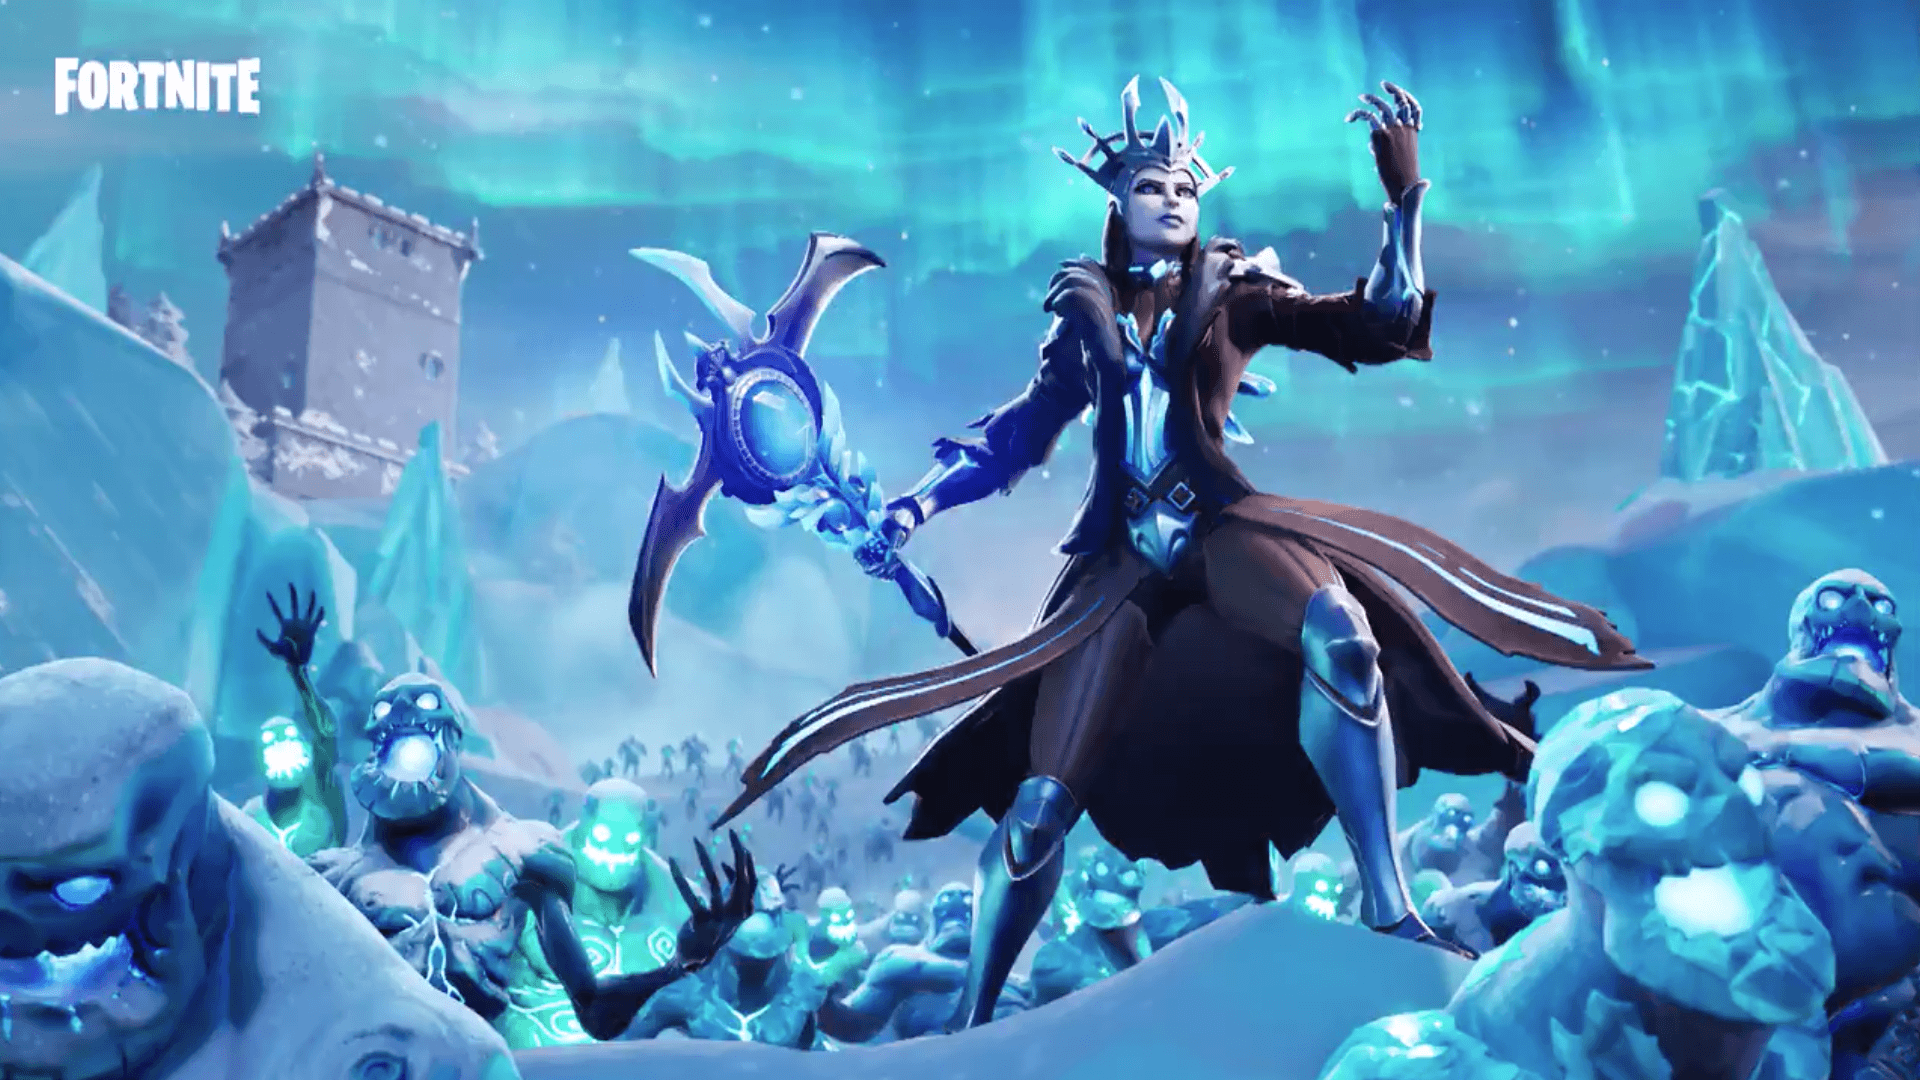 Fortnite's Ice Storm cometh, Ice King dumps blizzard on the whole